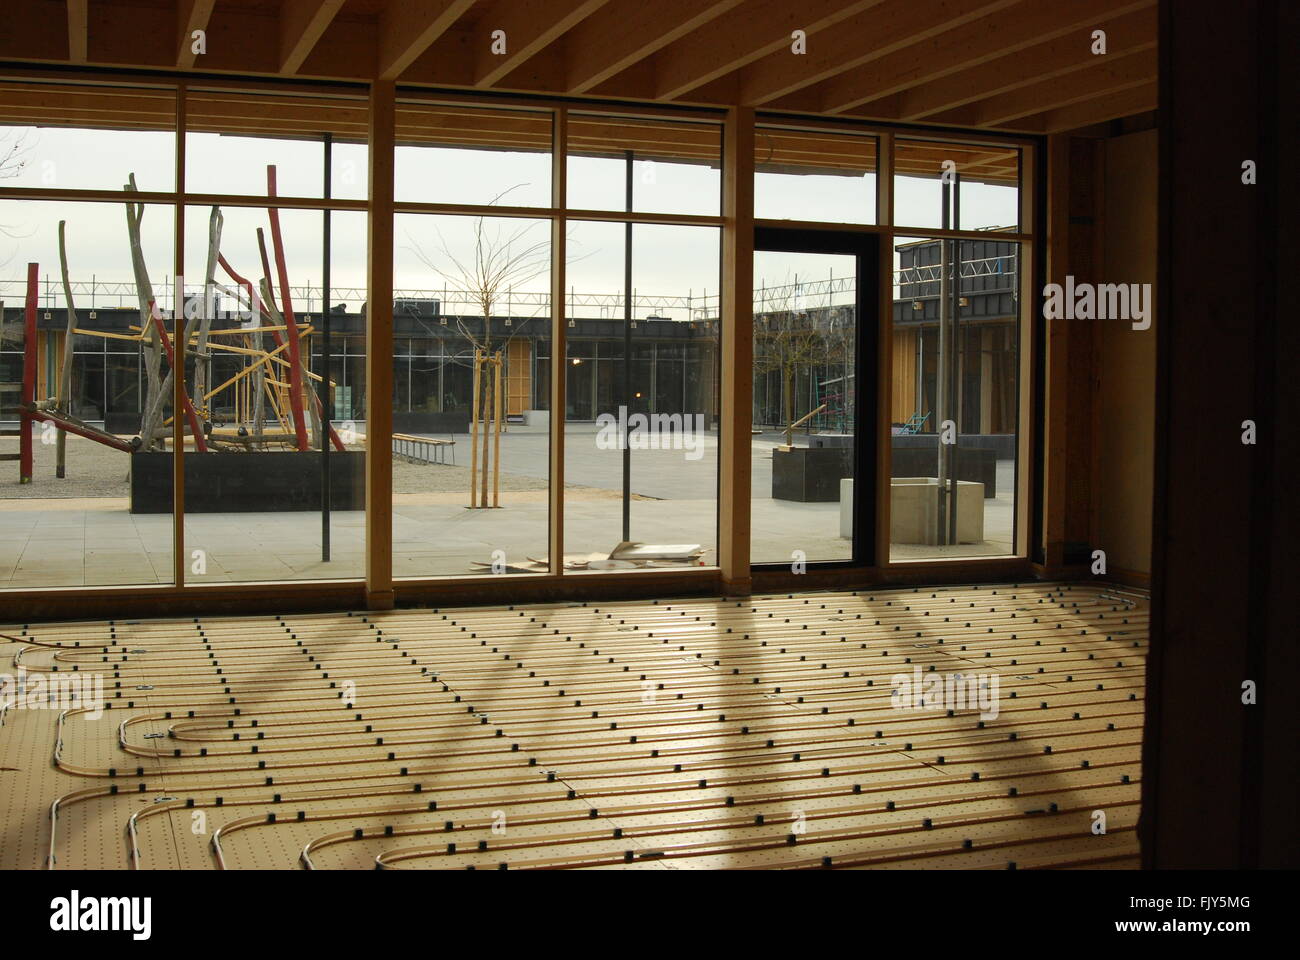 View of heating coils and school playground in a construction site Stock Photo